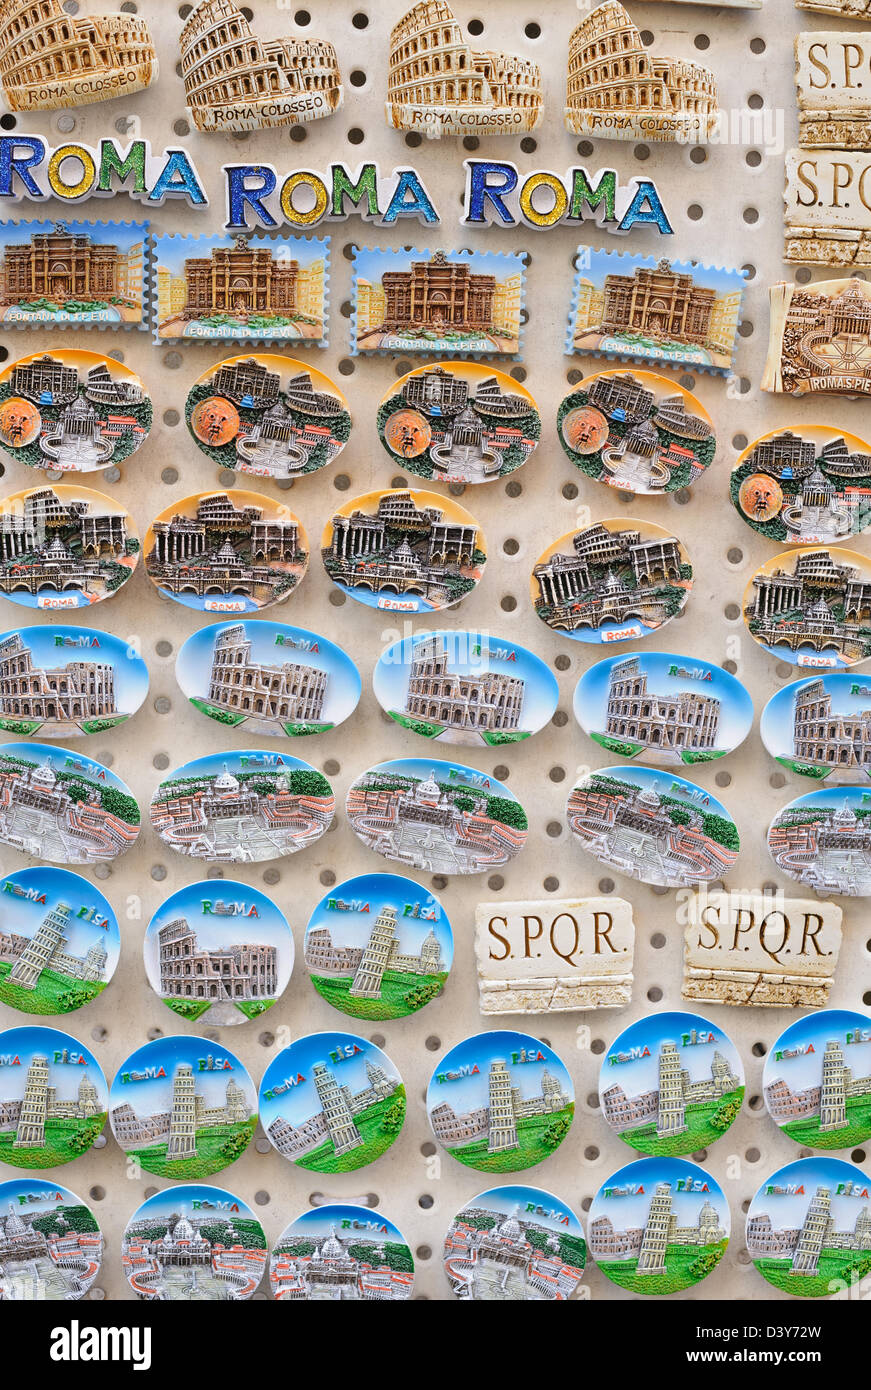 Fridge magnets featuring the tourist sites / sights of Rome in Italy outside a souvenir shop in the City Stock Photo